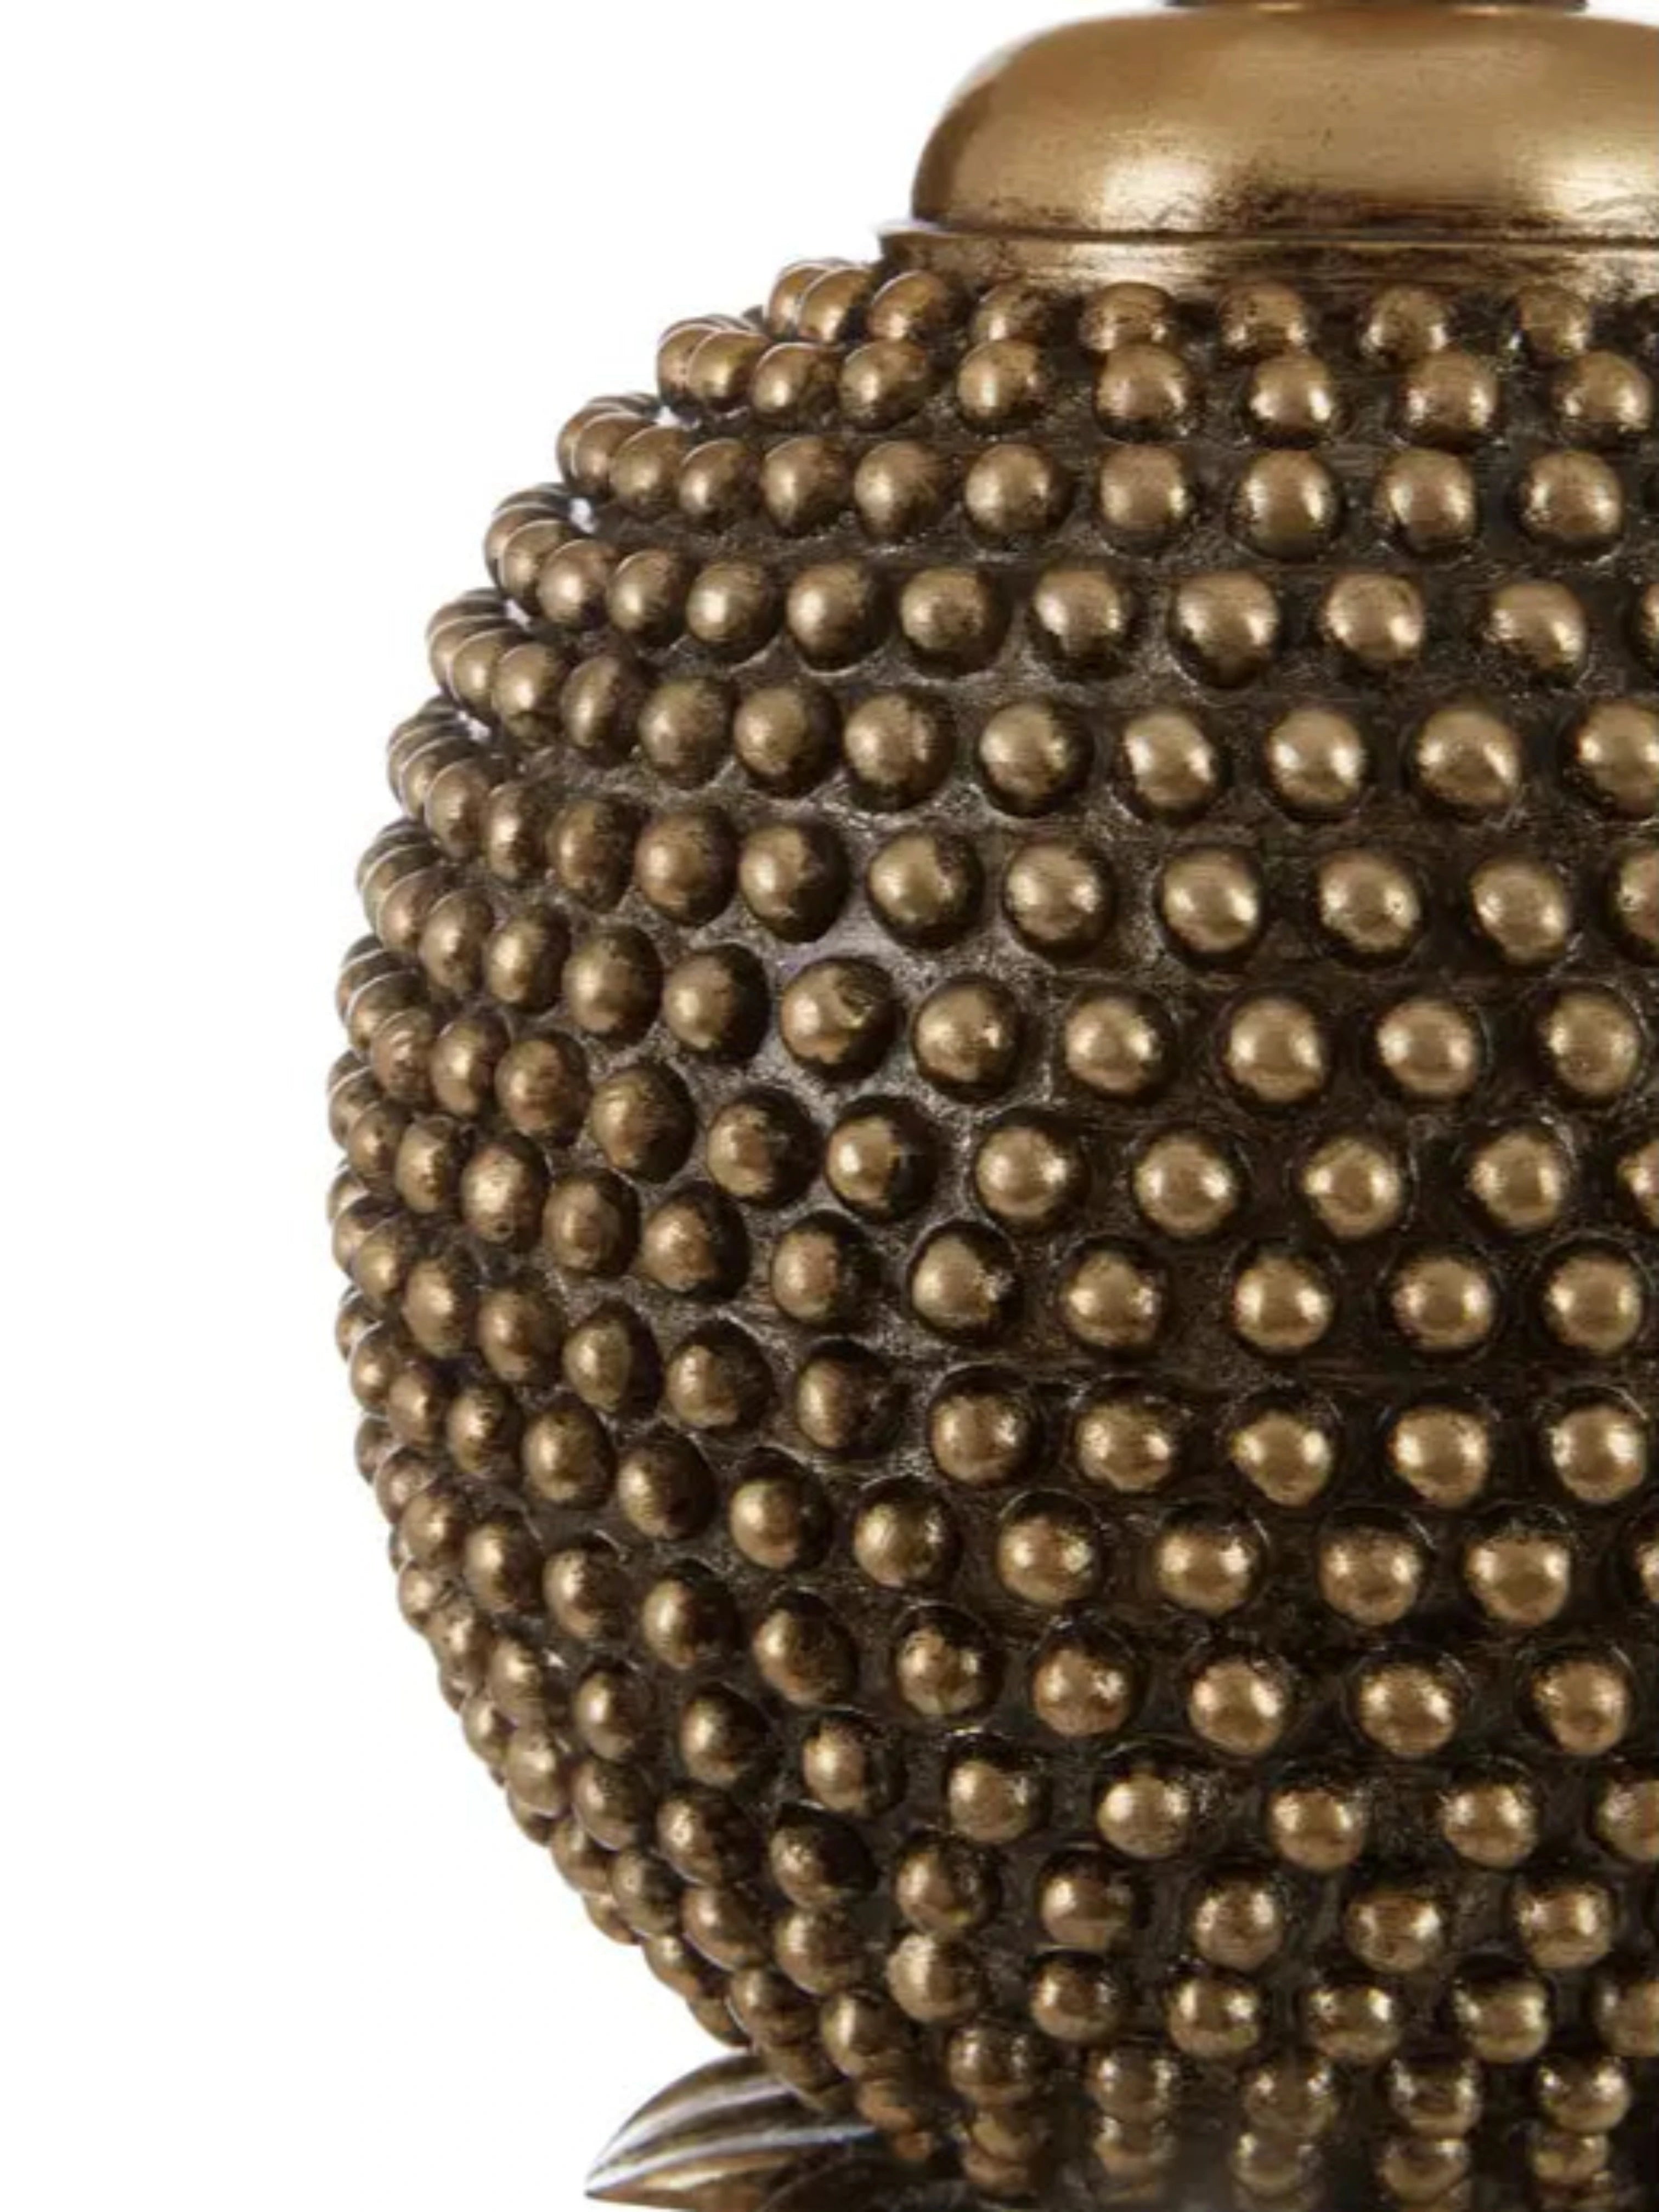 Gold Textured Ball Lamp with White Shade